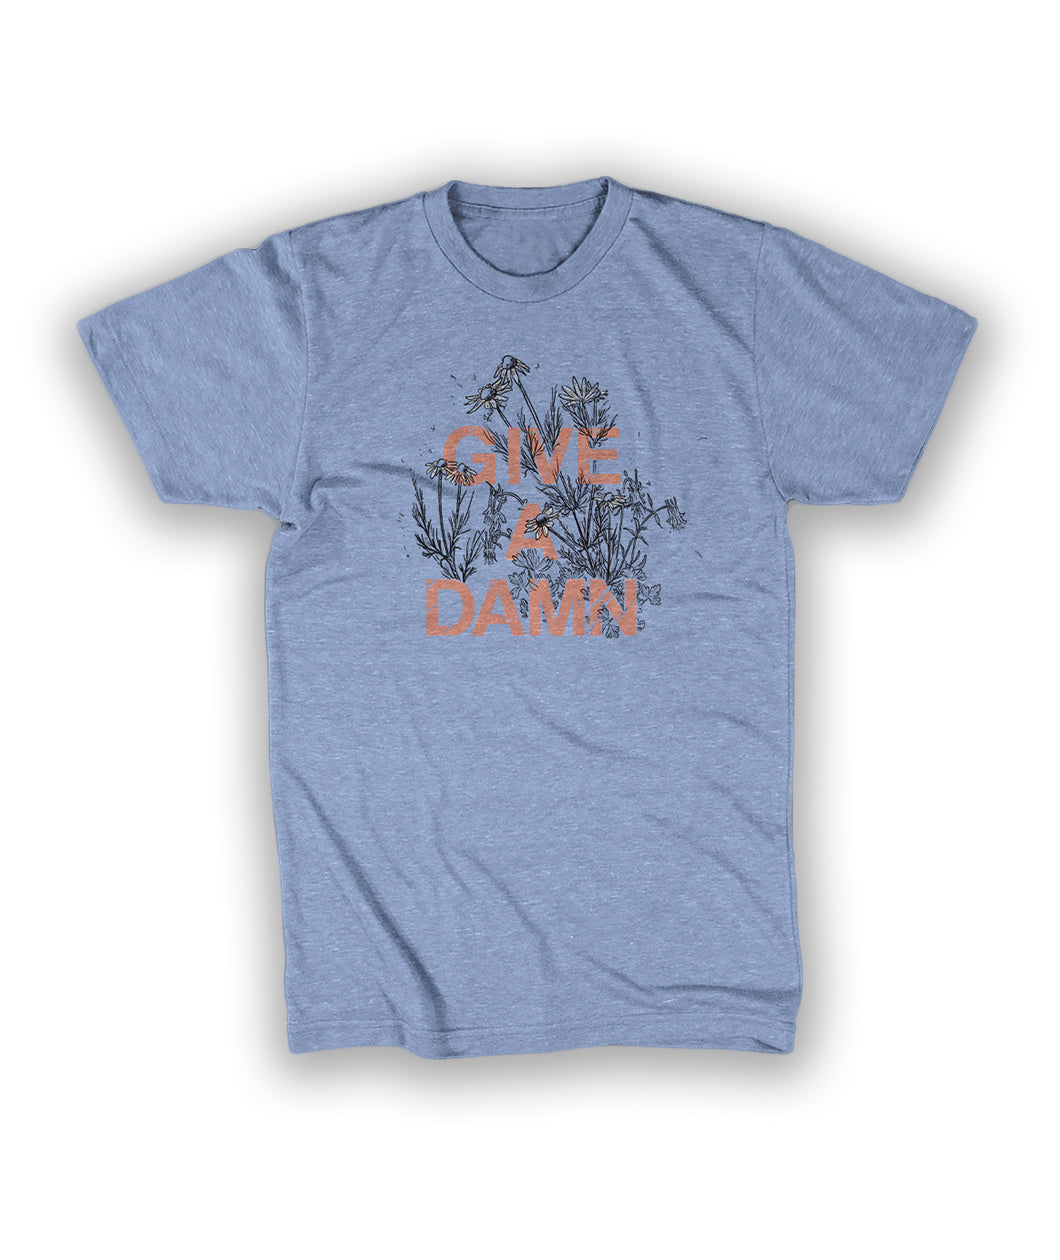 Blue shirt with “Give A Damn” in peach colored sans serif font, with the words stacked on top of each other, and plants weaving through the text - from Tyler Thrasher